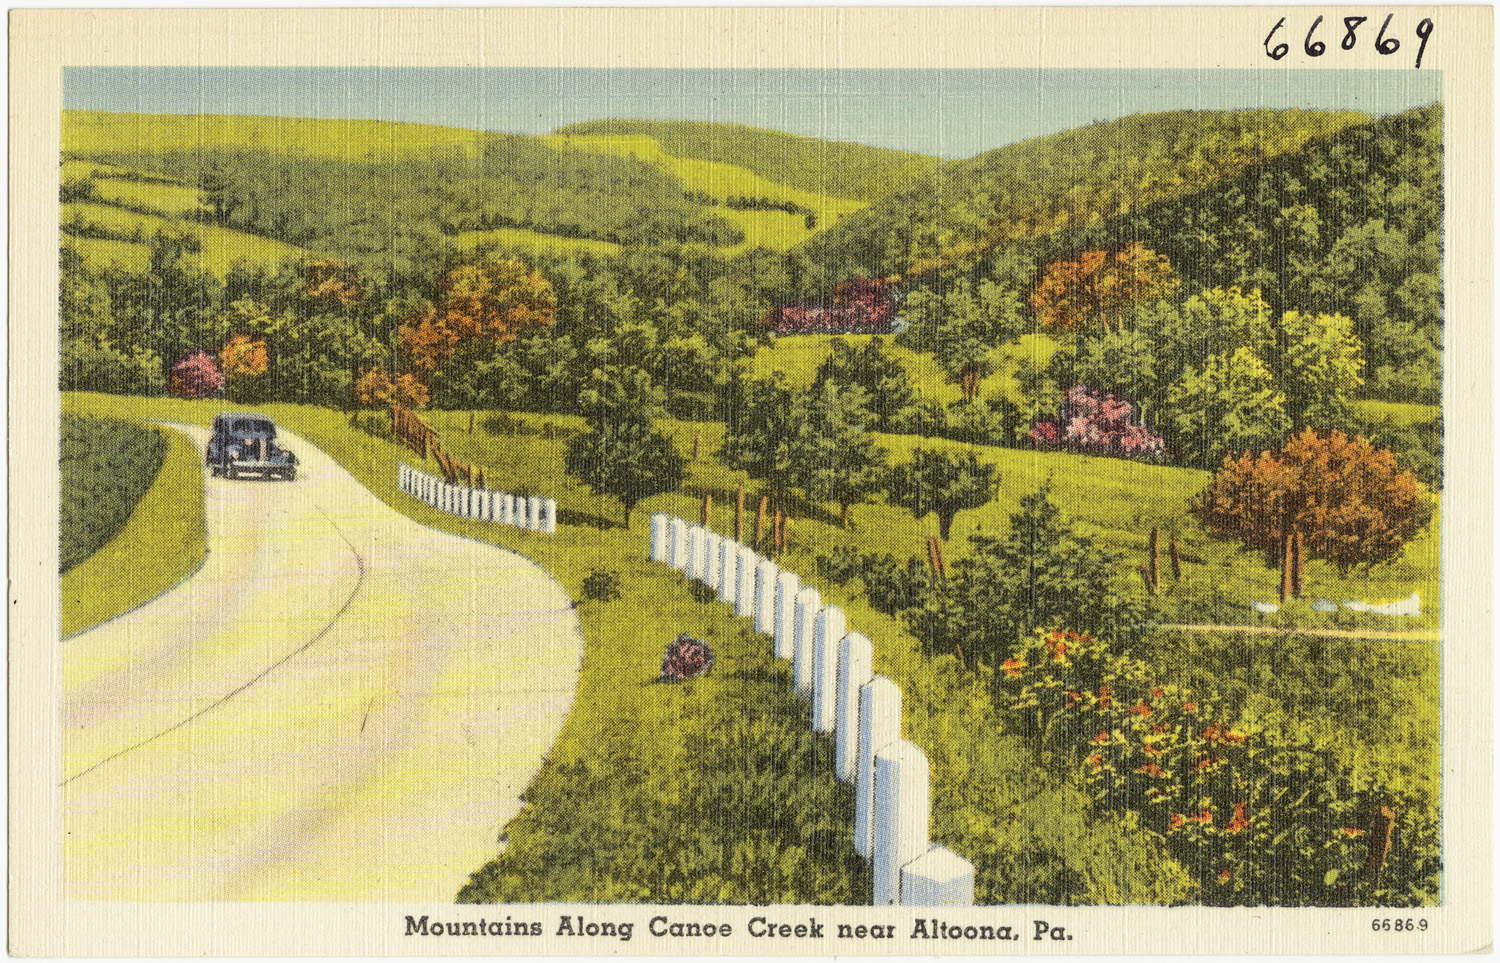 an early postcard of a scenic country road